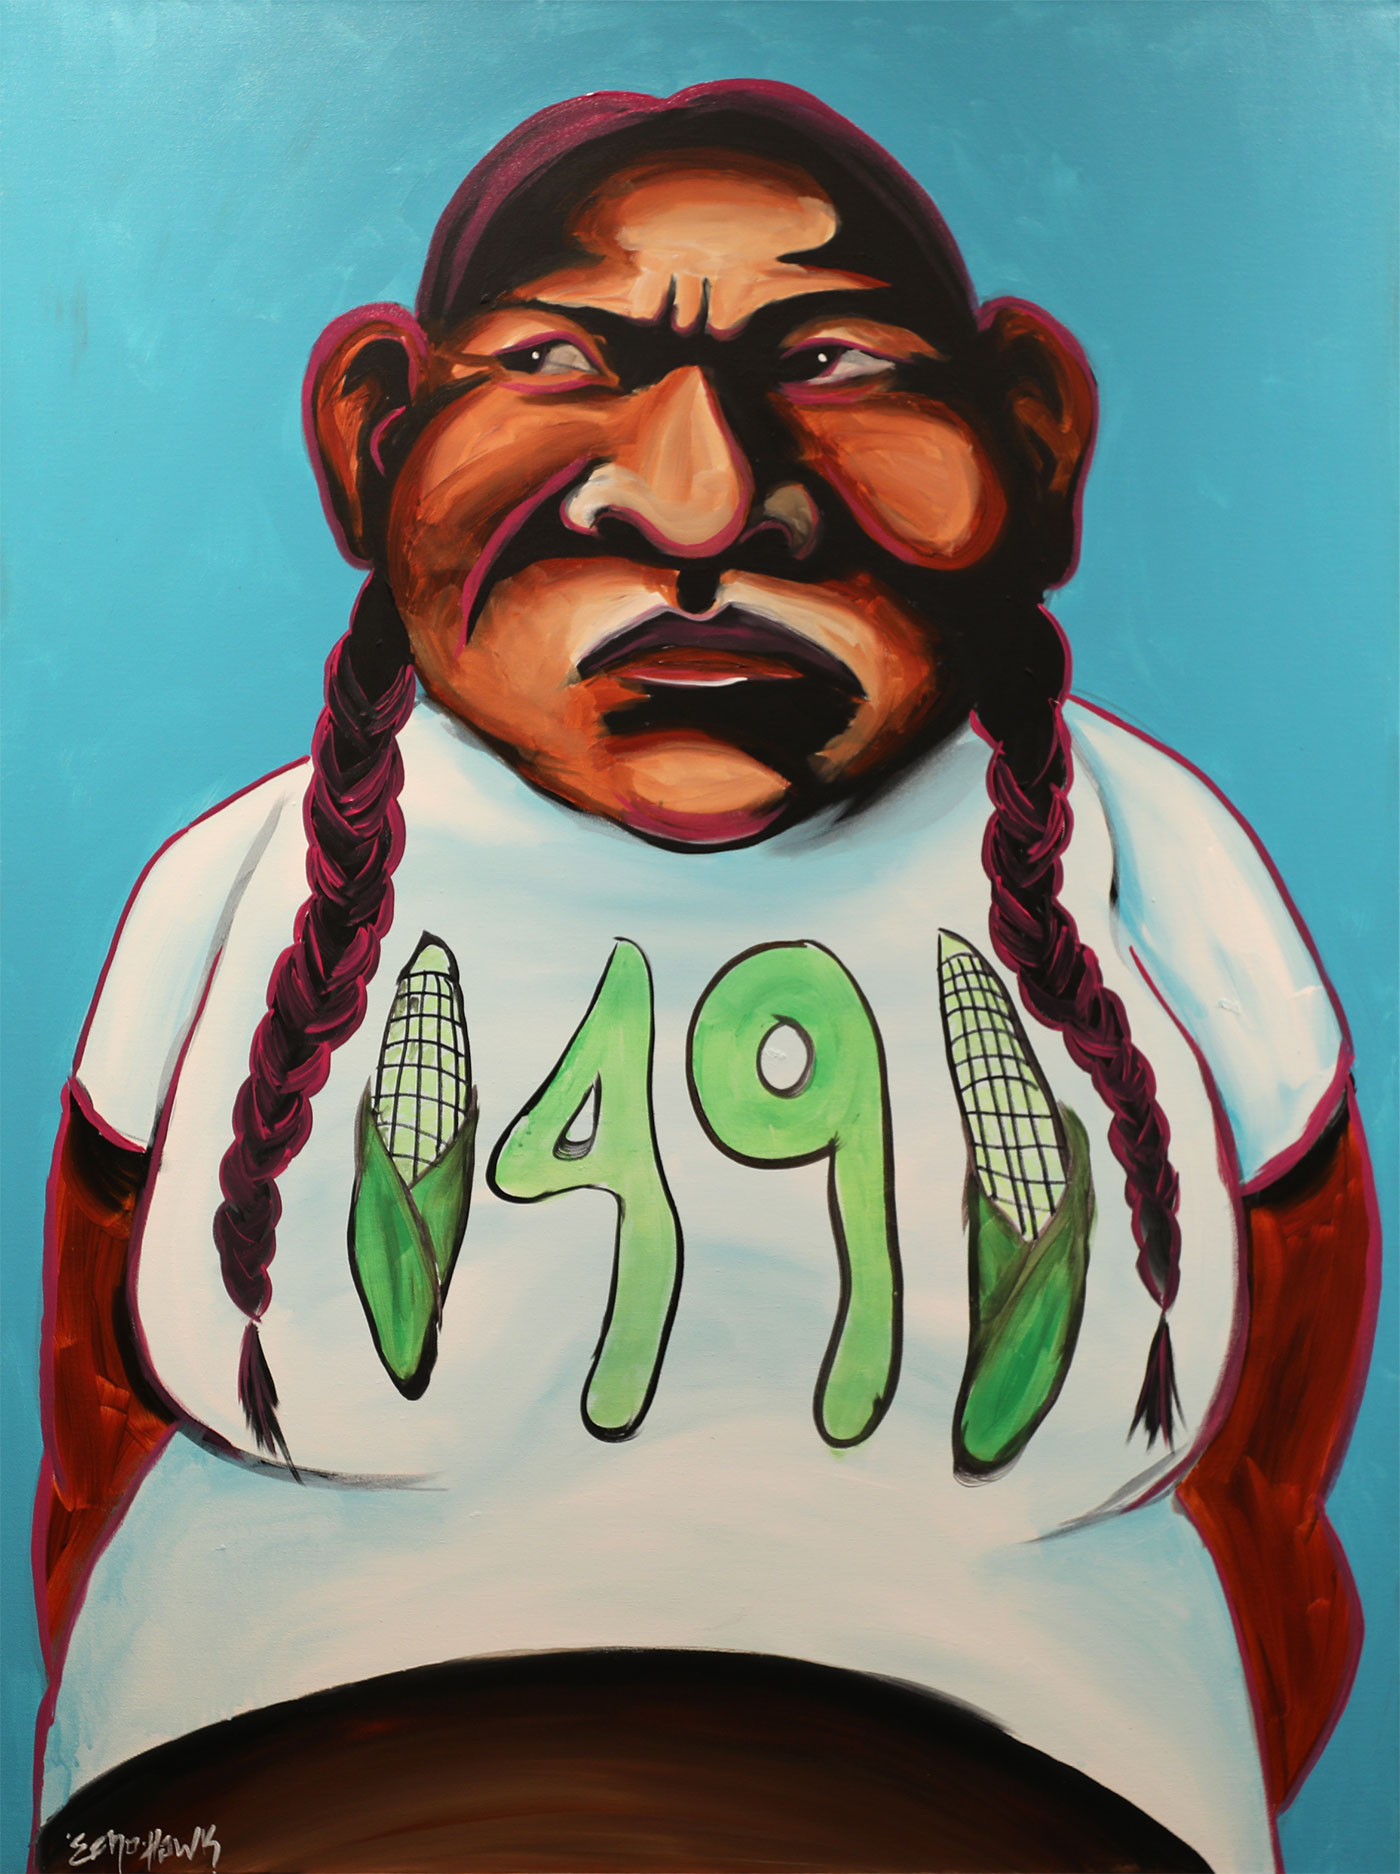 Overweight Native American man with braids gazes to his proper right on a blue background. Man is wearing a white t-shirt with two corn stalks on either side of the numbers '4' and '9' (to create '1491'). The t-shirt logo is painted in shades of green.